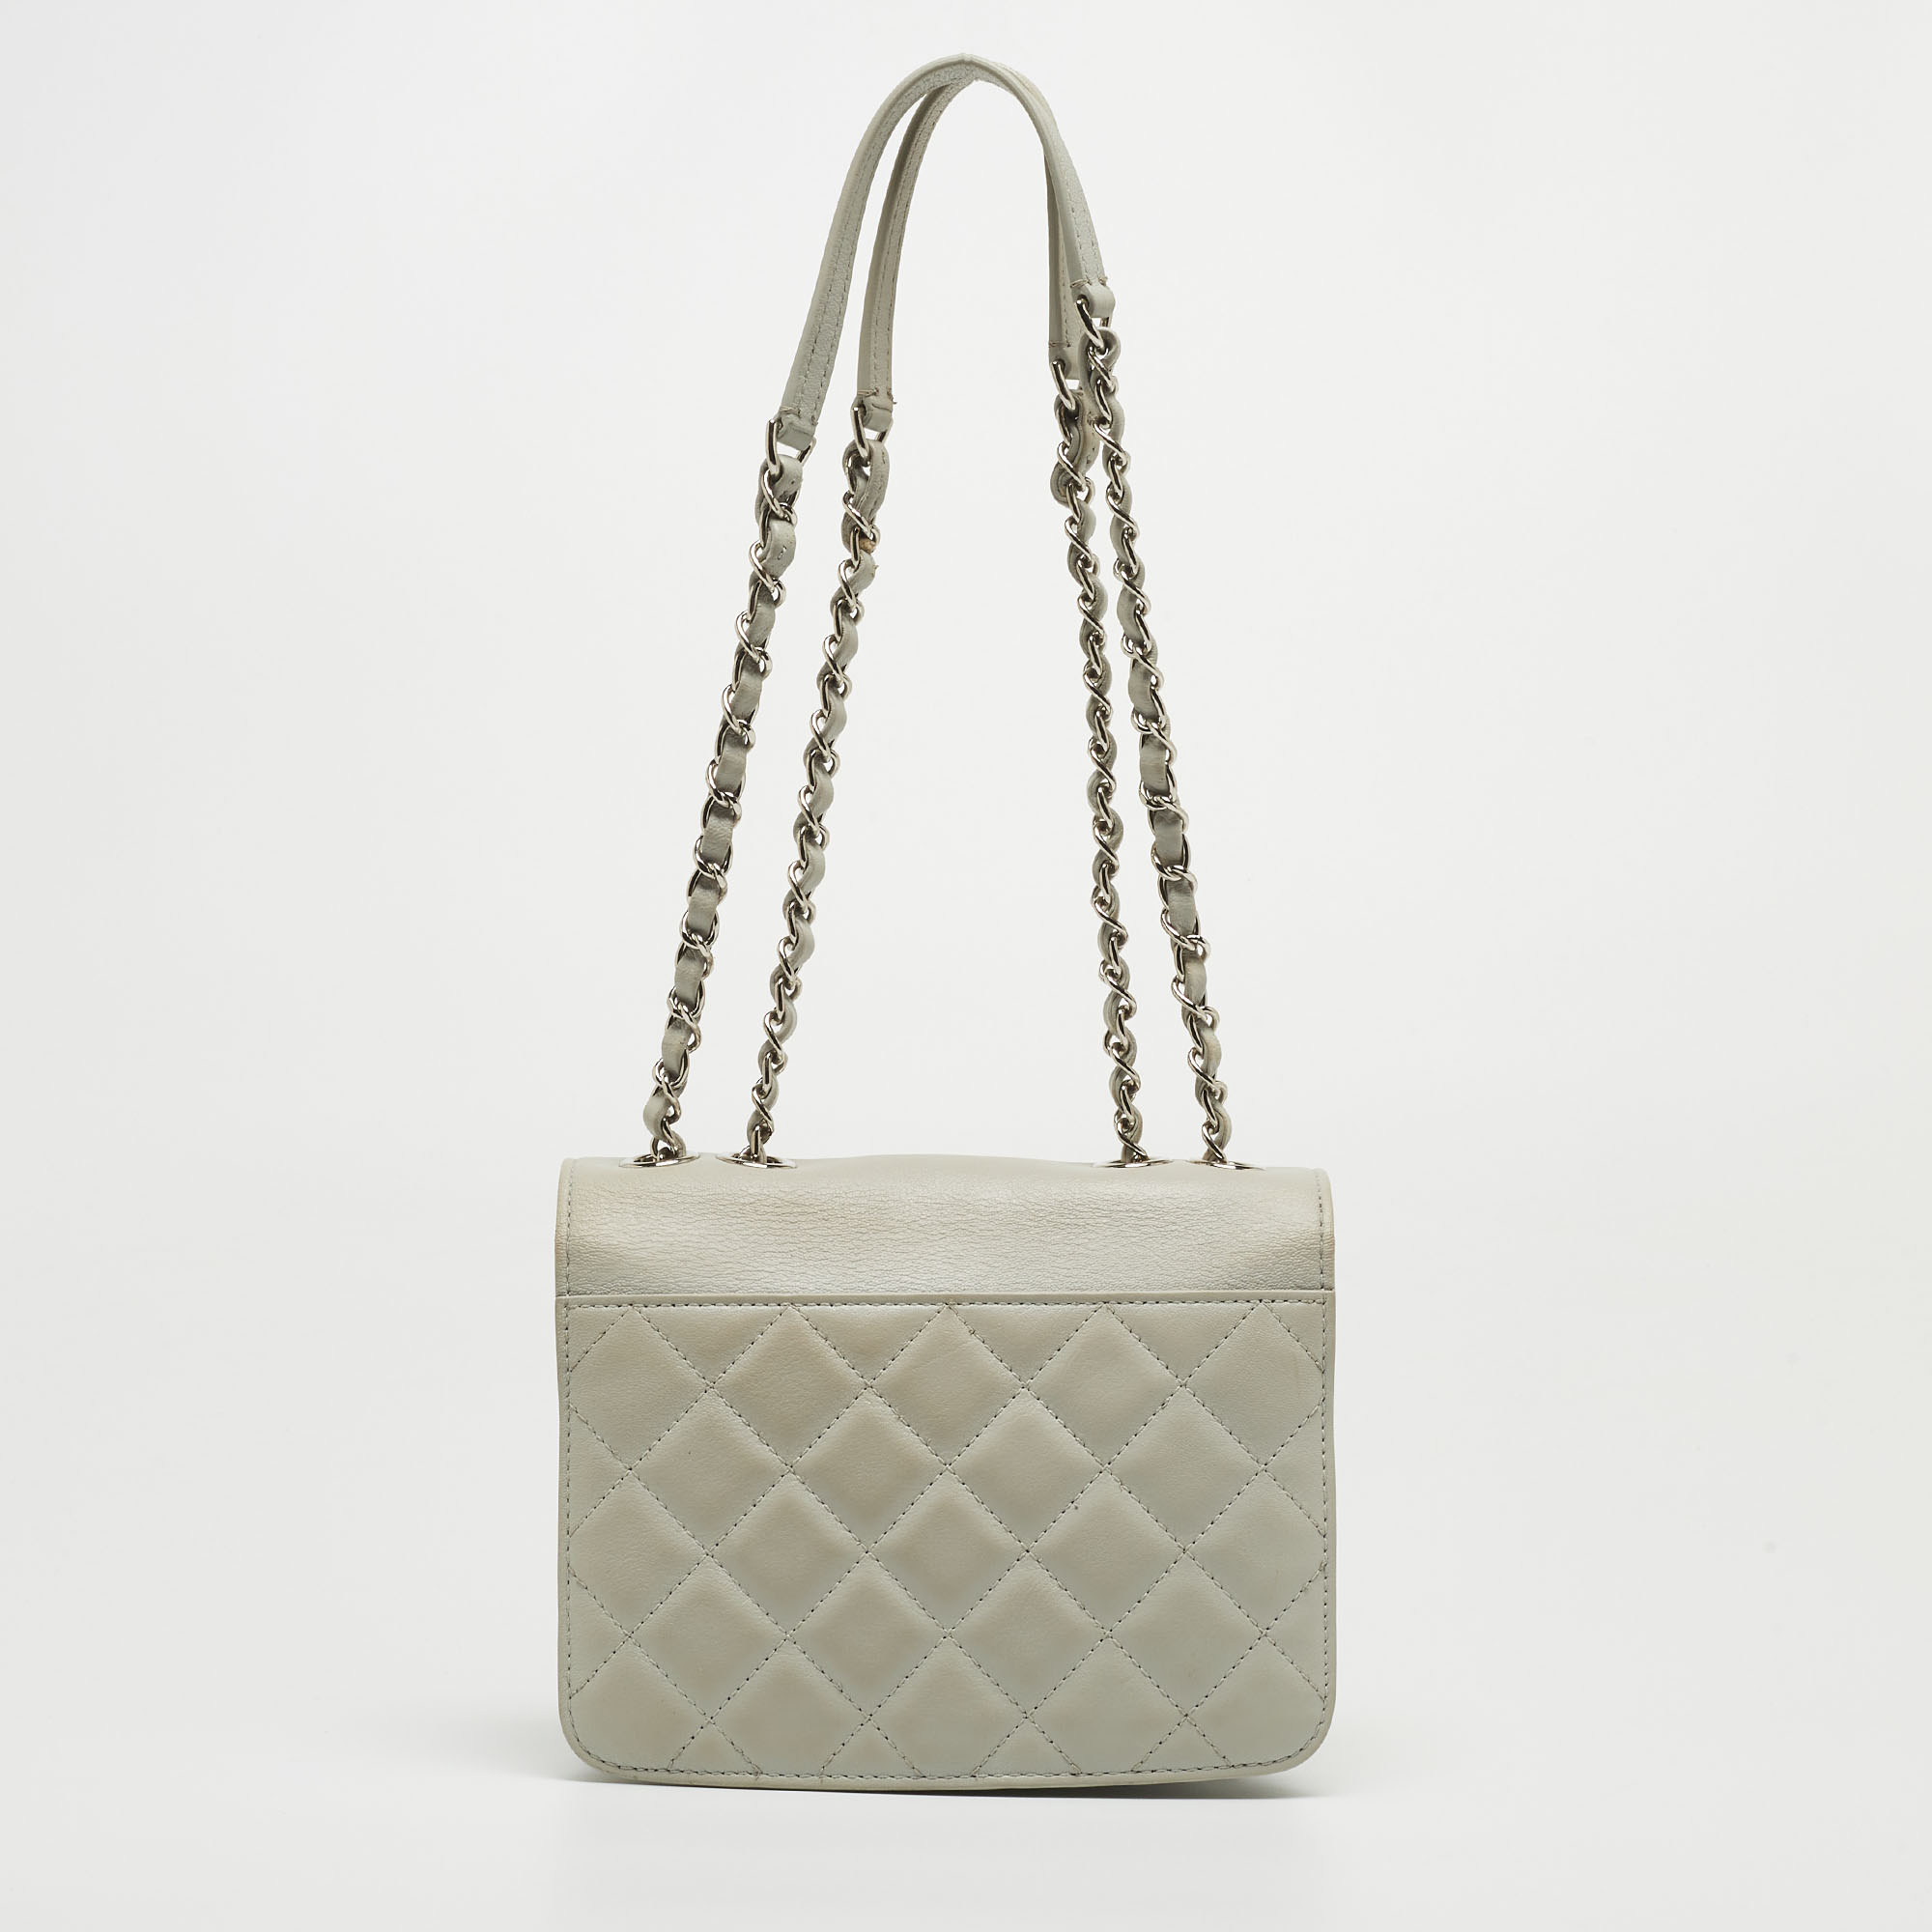 Chanel Grey Quilted Leather Urban Companion Bag